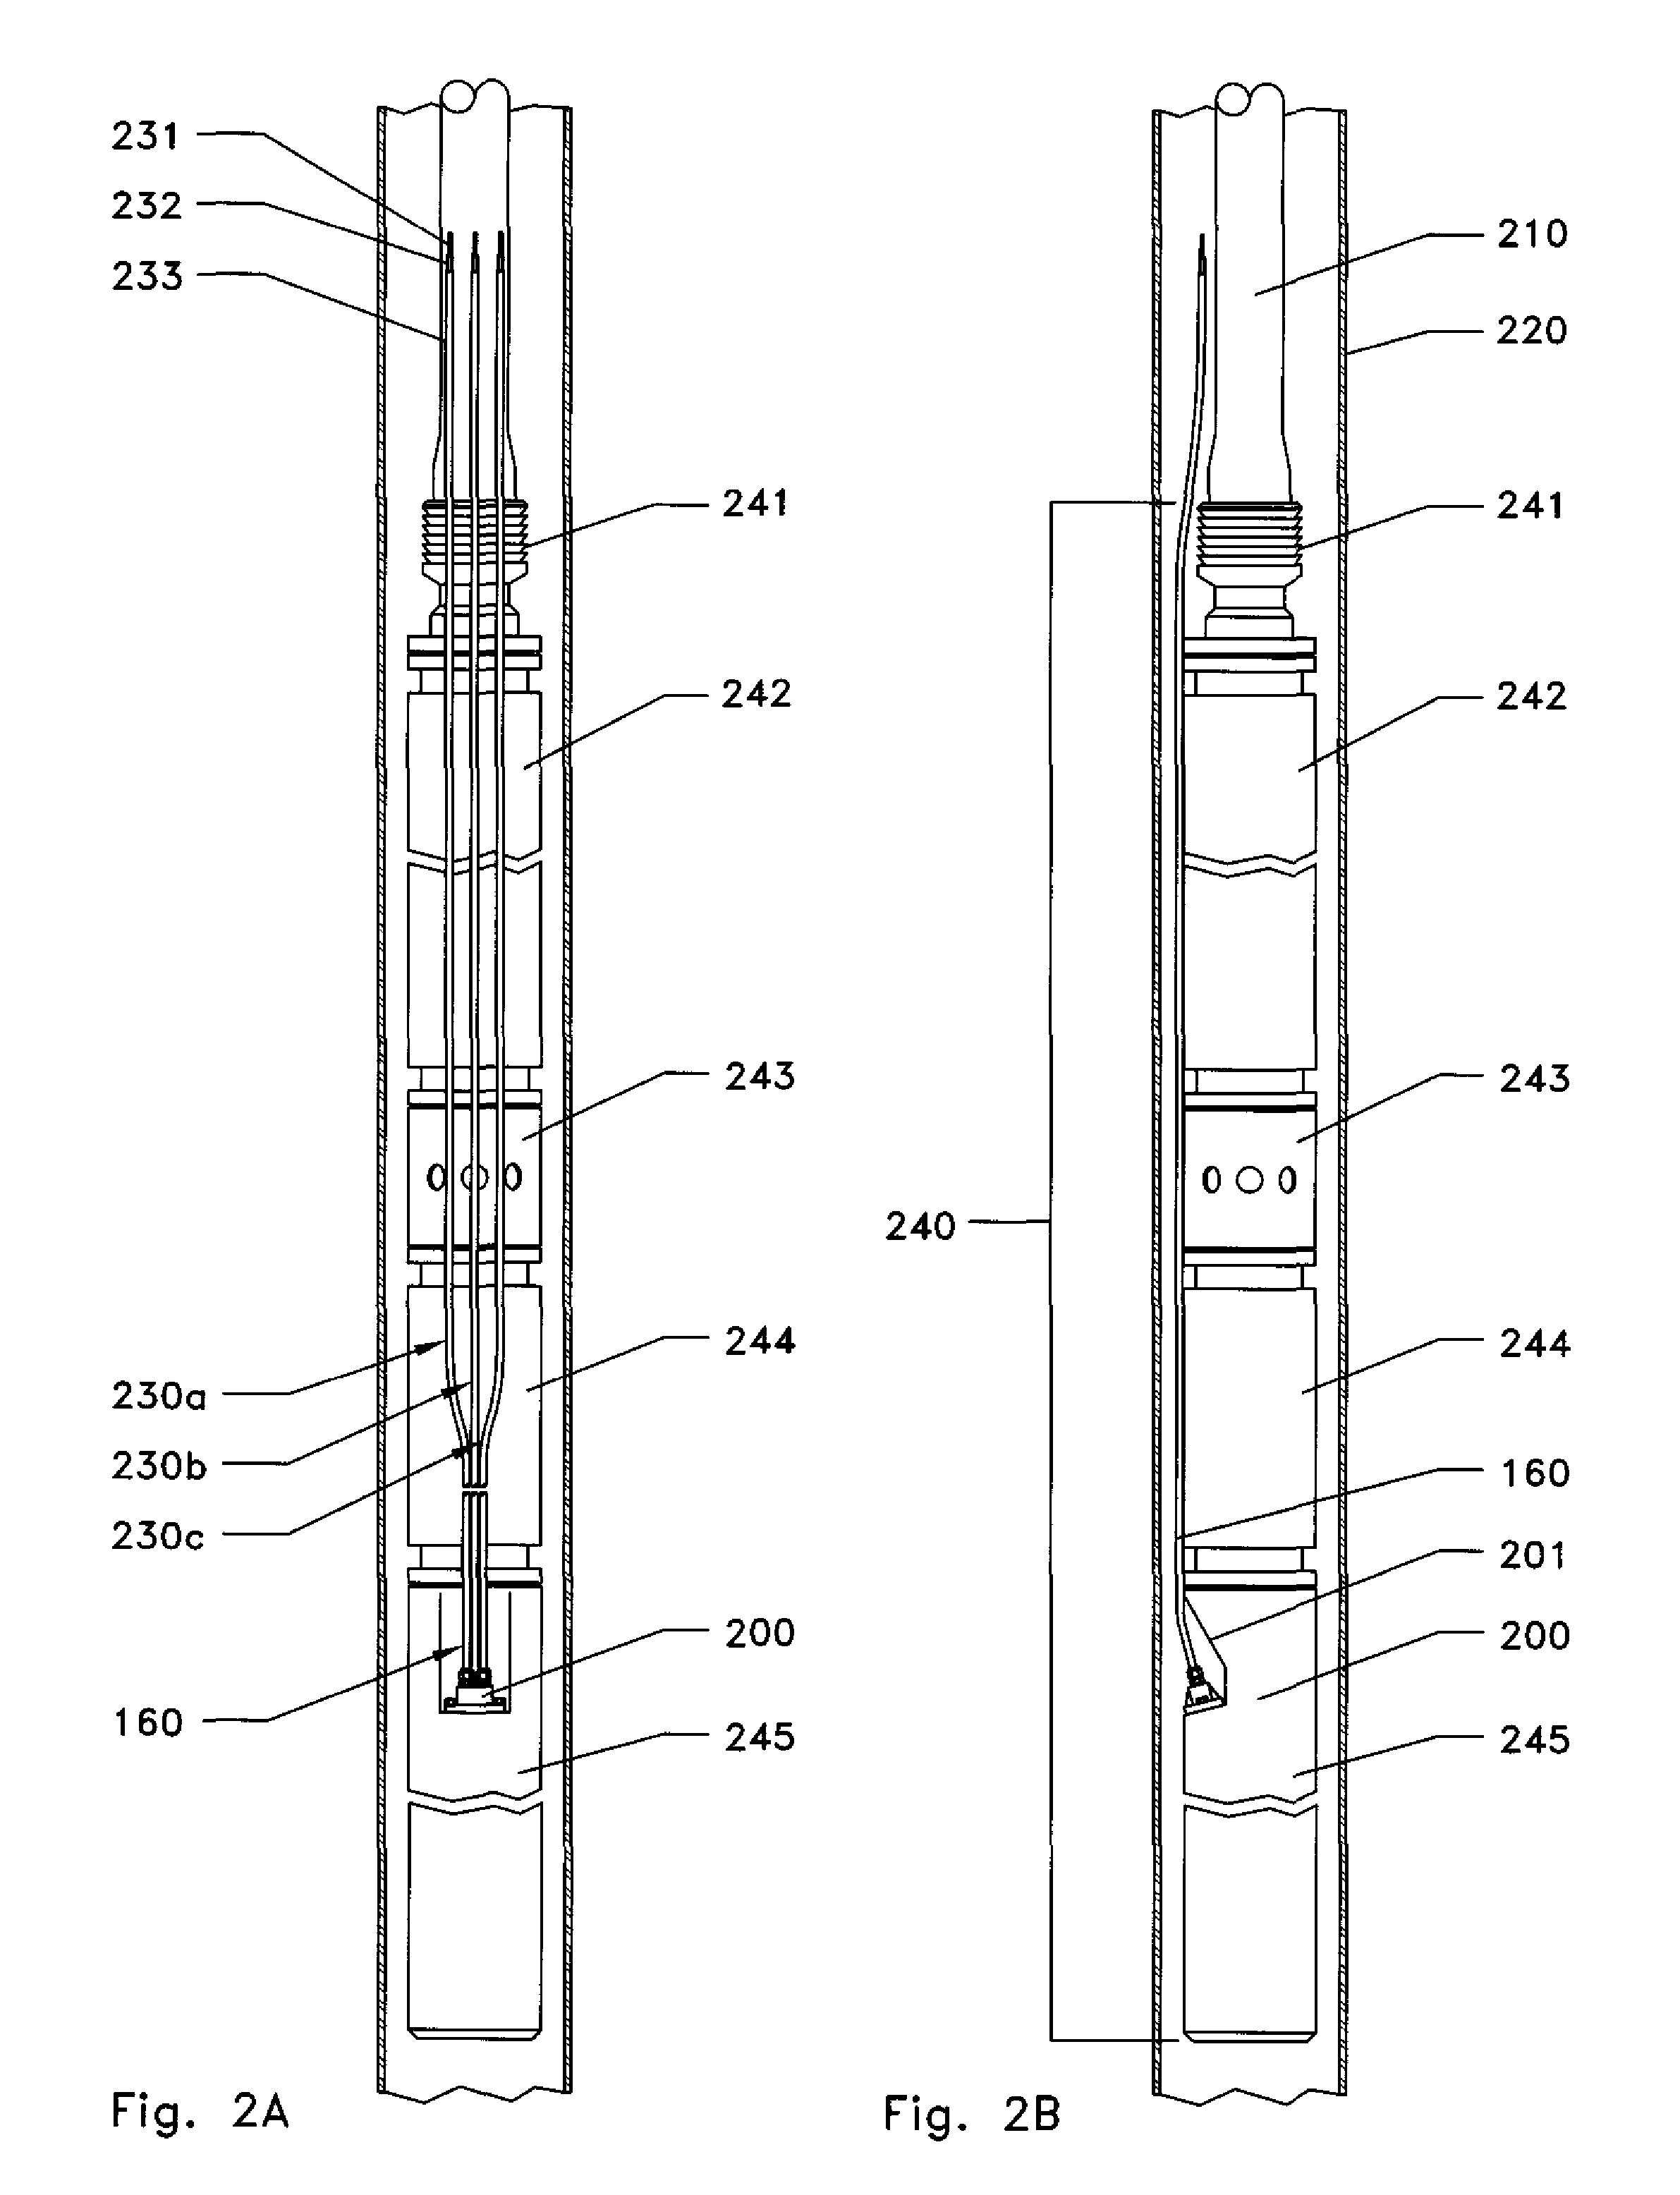 Electrical connector for insulated conductive wires encapsulated in protective tubing